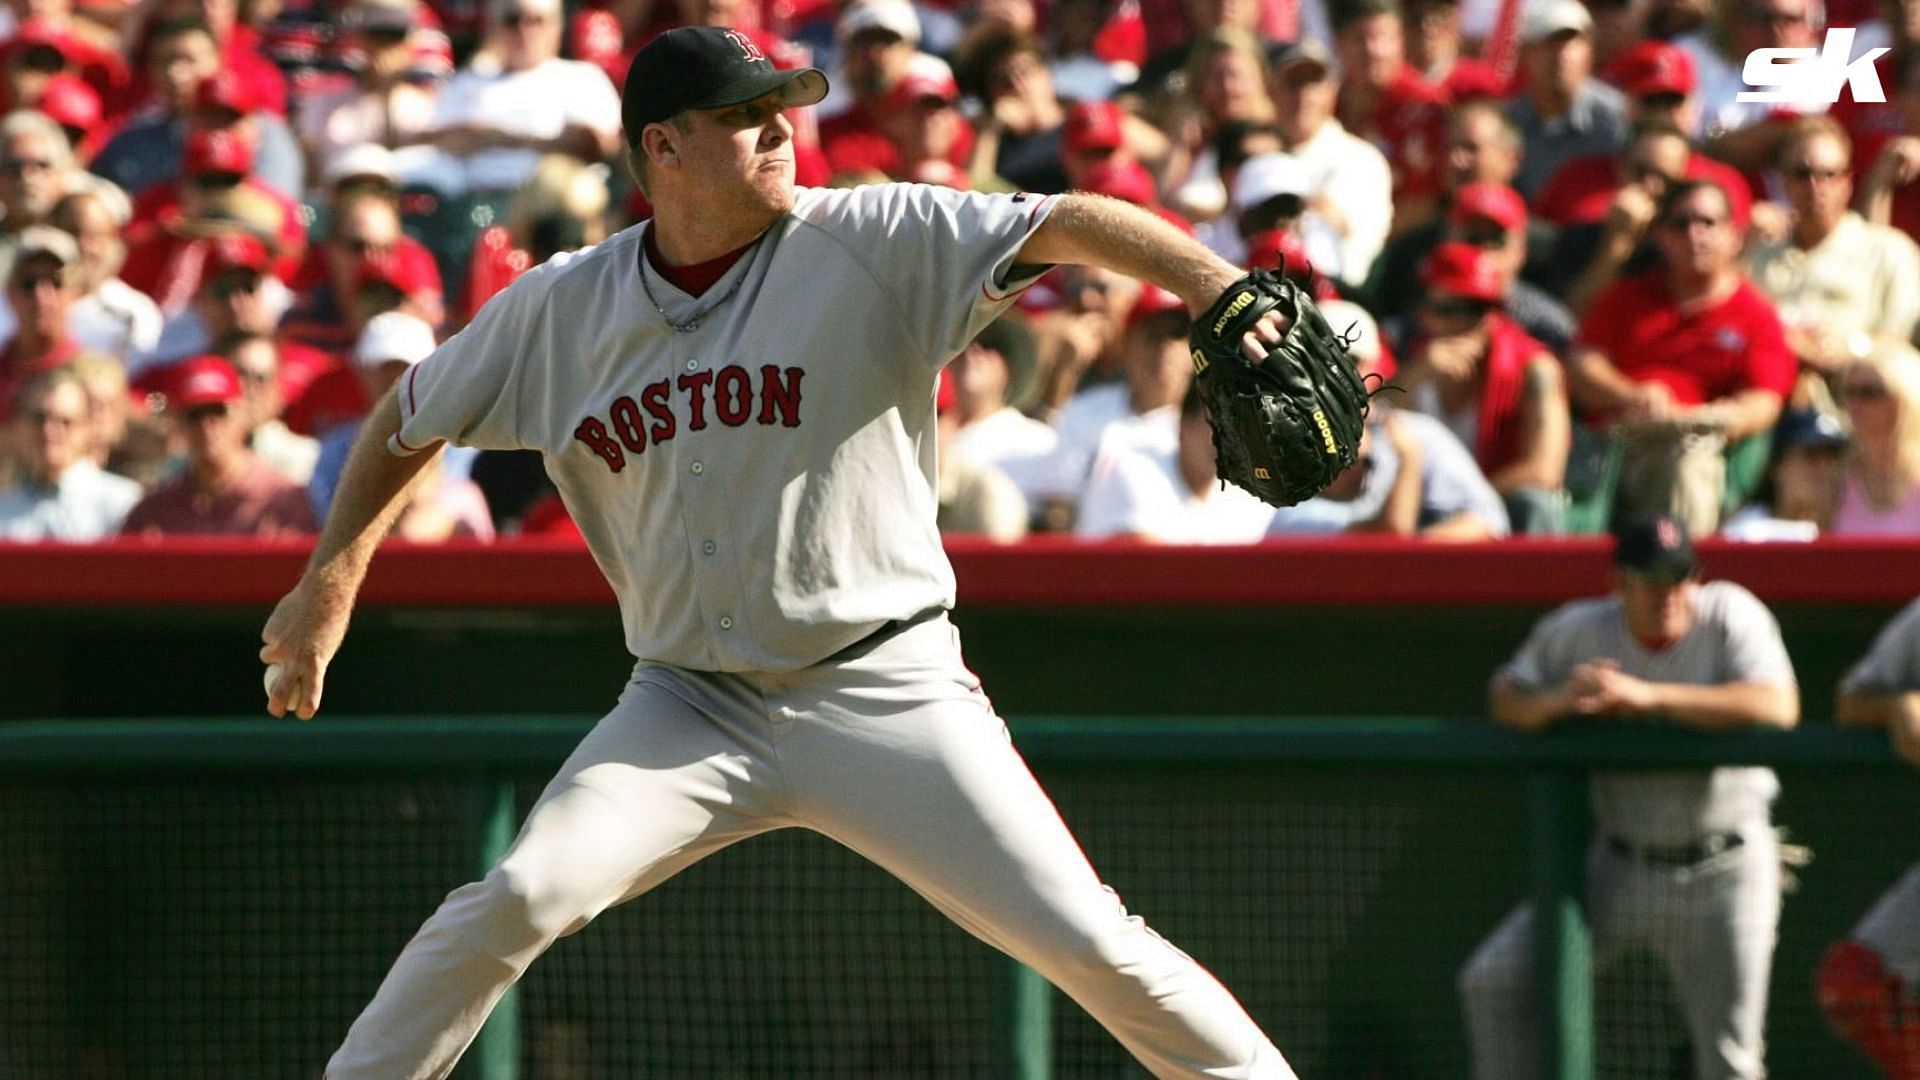 Curt Schilling, former Red Sox and Phillies pitcher, lost entire